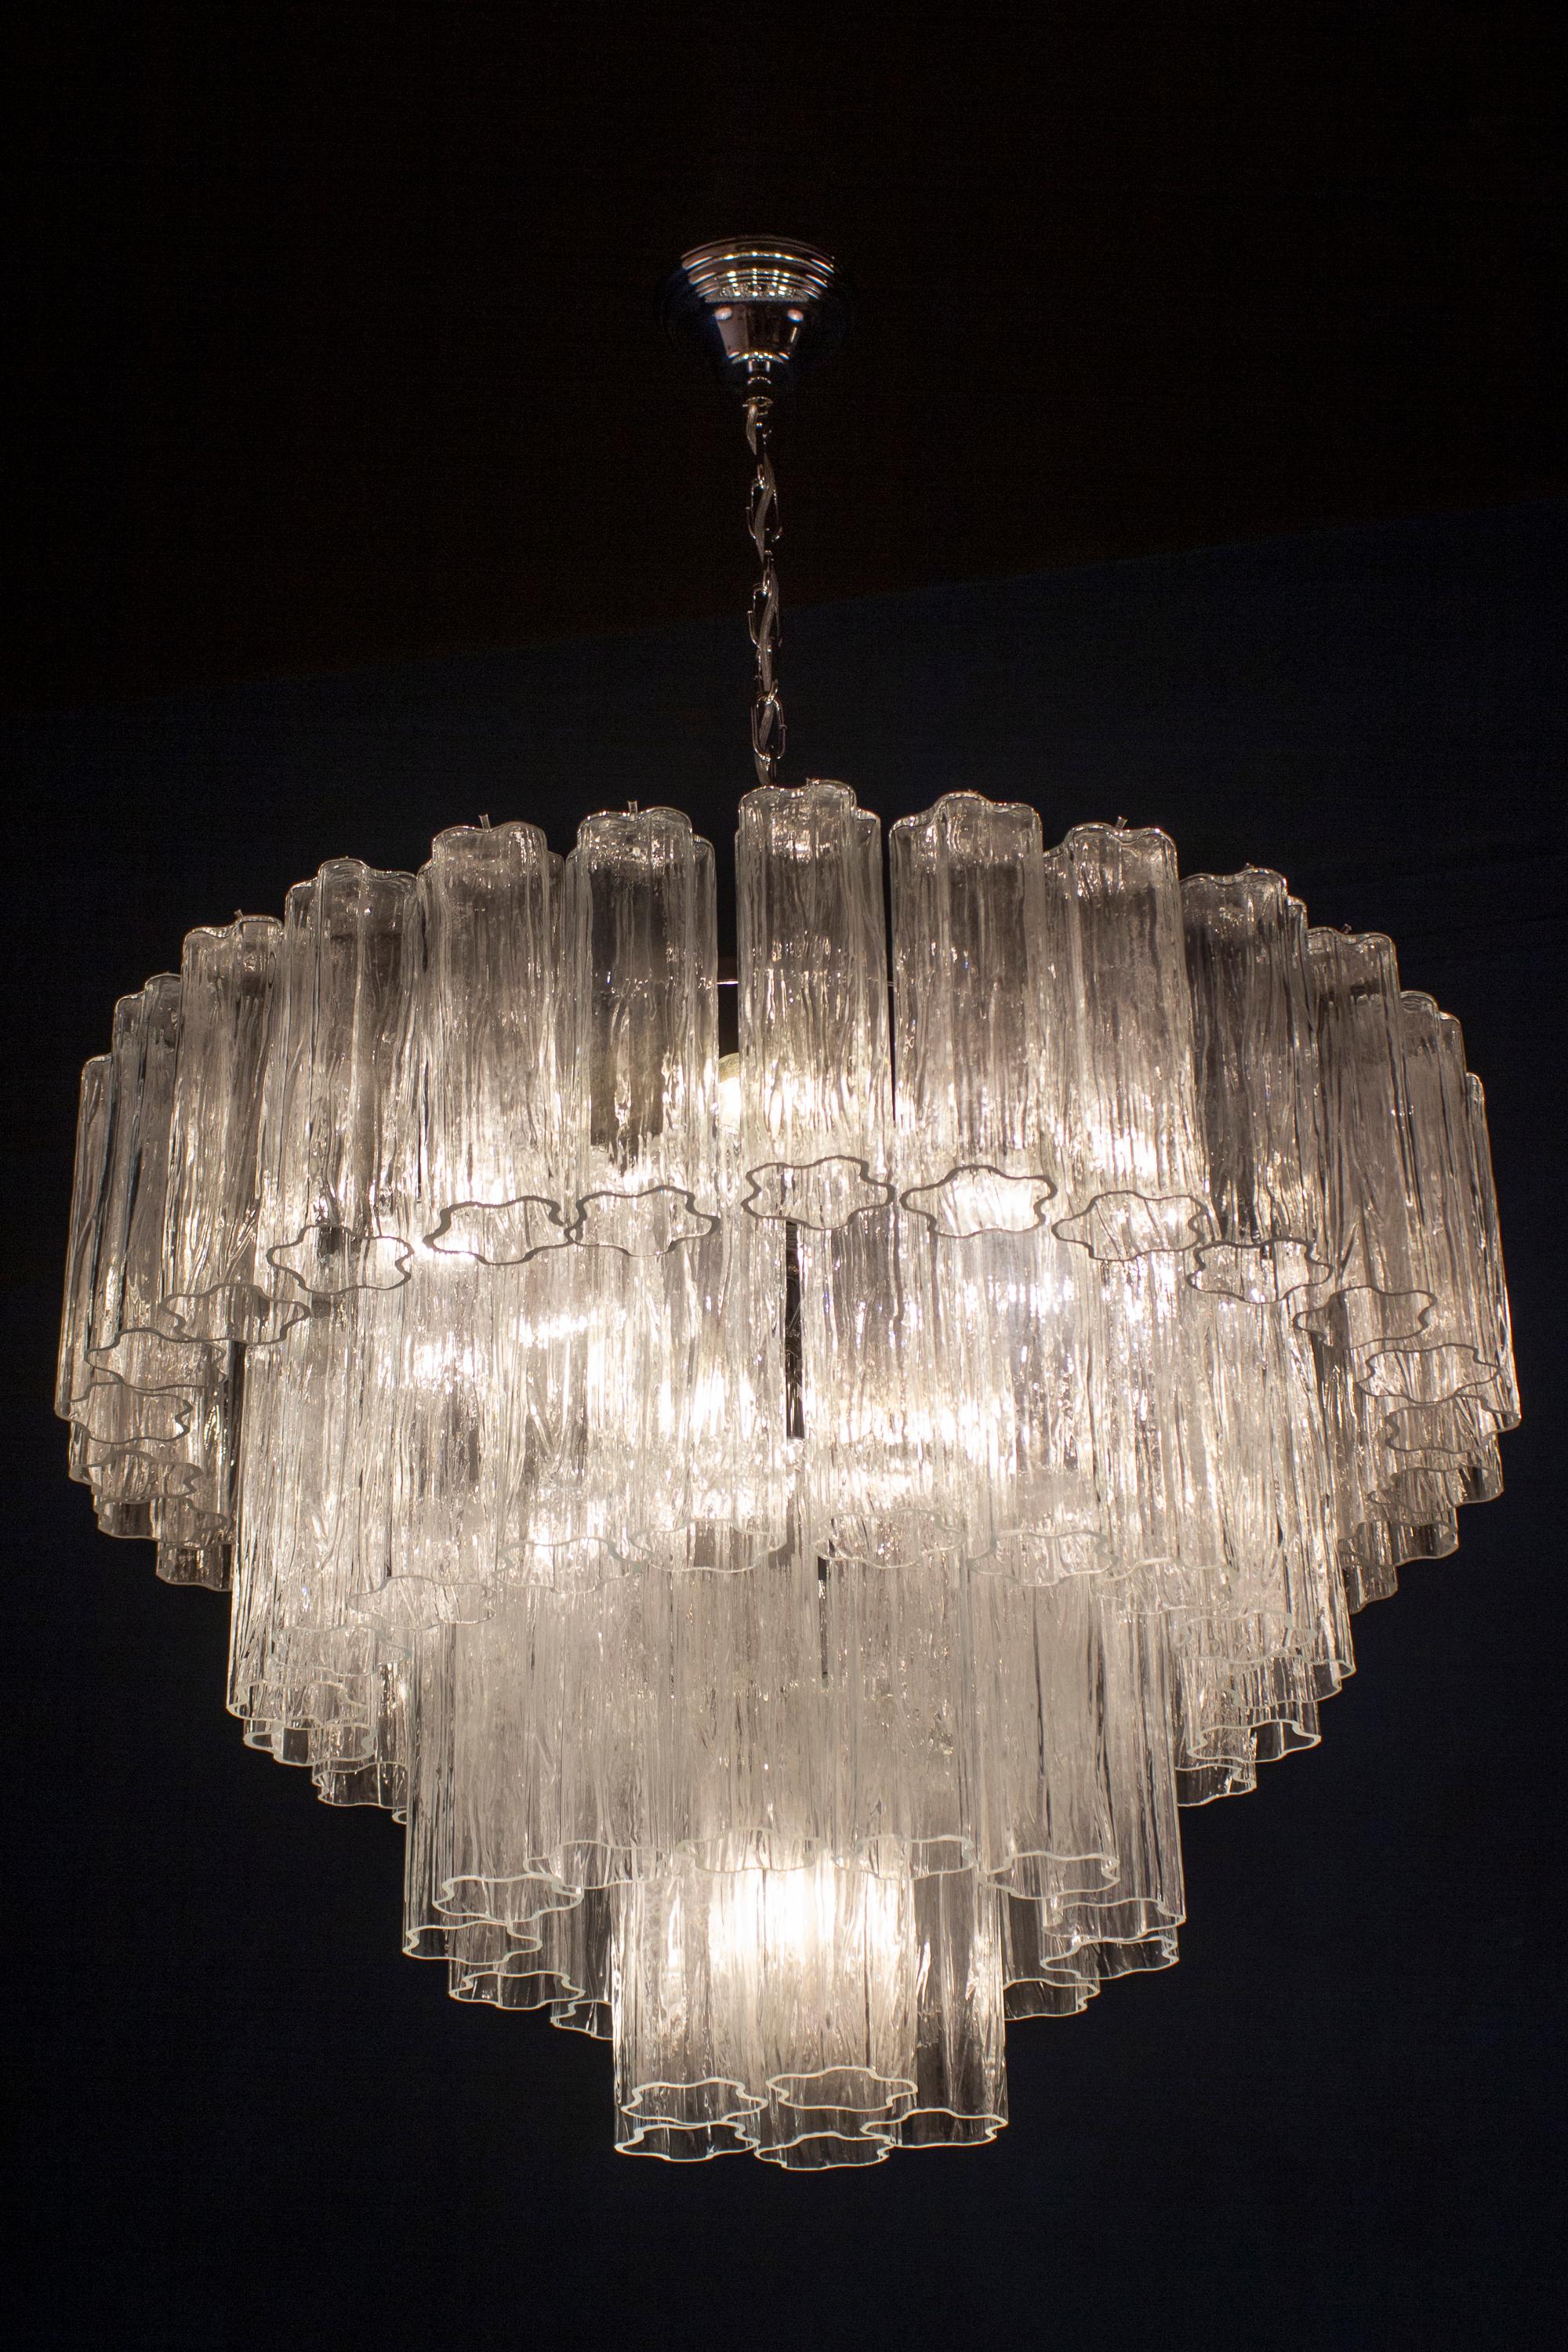 Amazing chandelier with 66 clear tronchi Murano glasses 20 cm long.
Nickel-plated metal structure on four levels.
 Eight E 27 light bulbs
 Price is \ item.

This light fixture can be disassembled and the glasses individually wrapped for easy